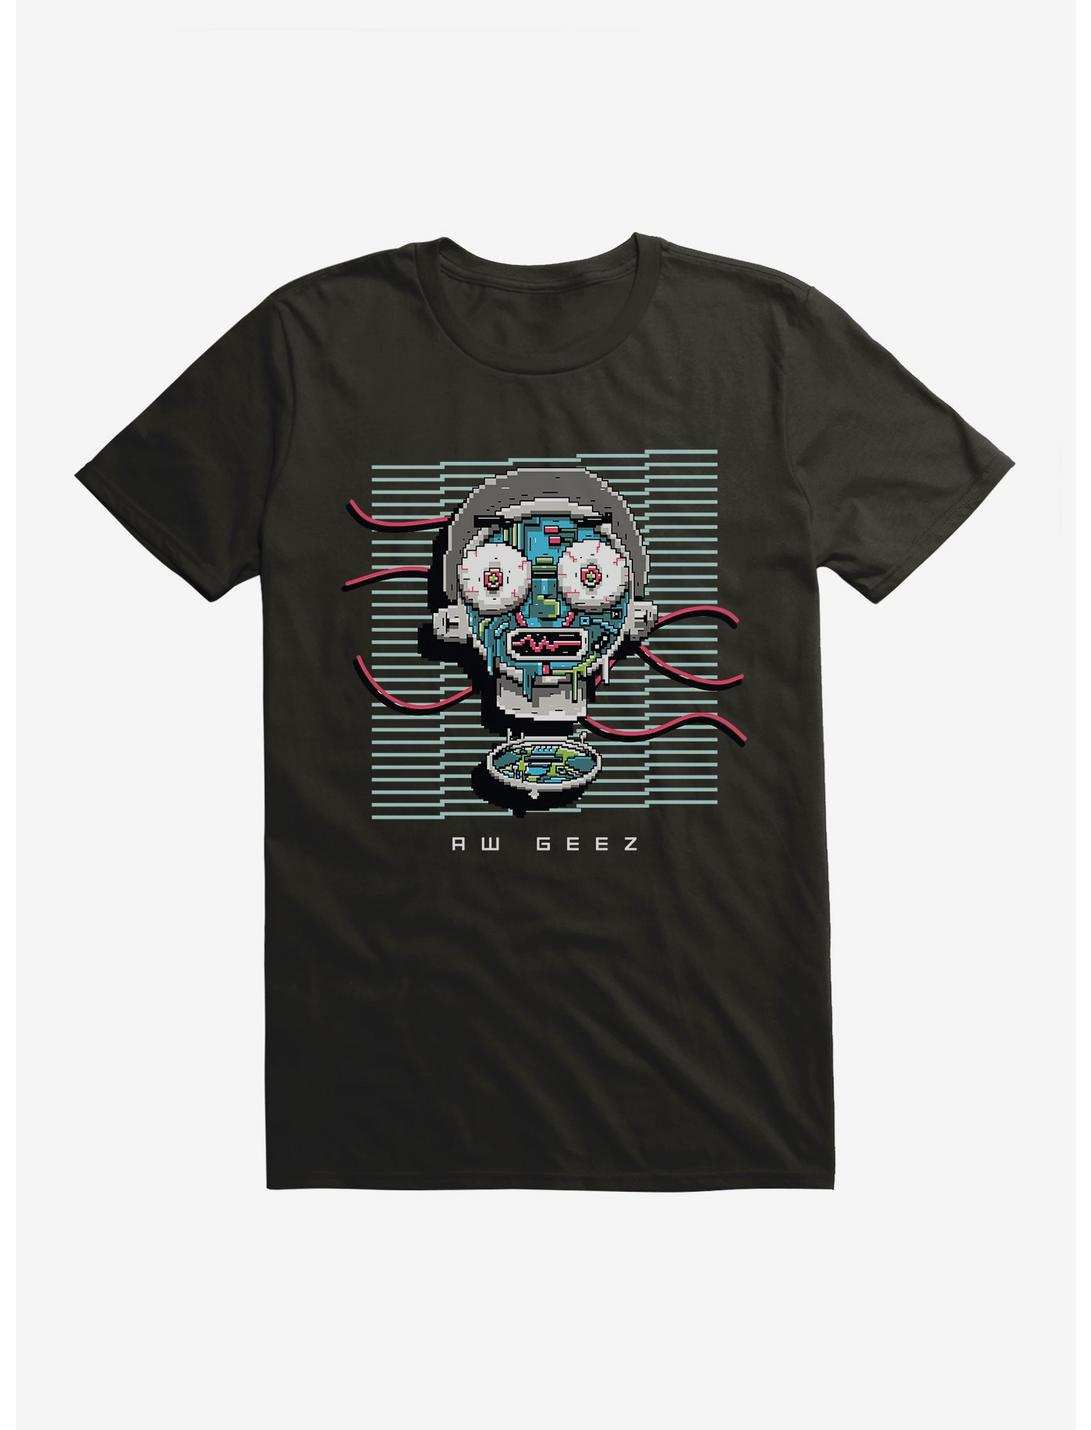 Rick And Morty Aw Geez T-Shirt, BLACK, hi-res